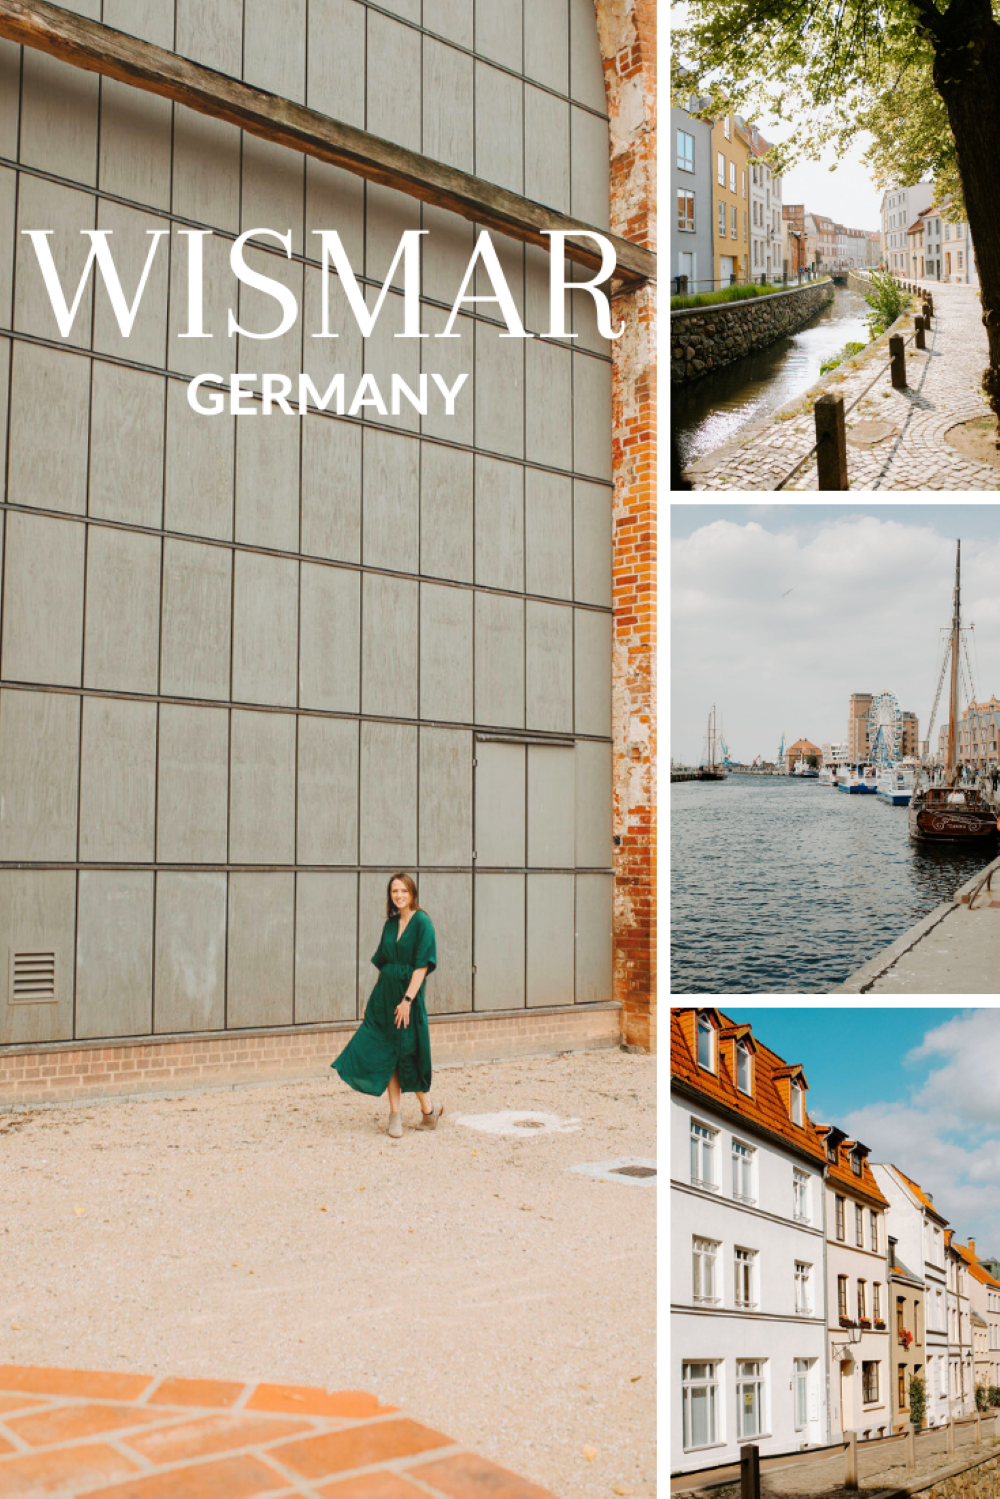 Where to go in Wismar, Germany